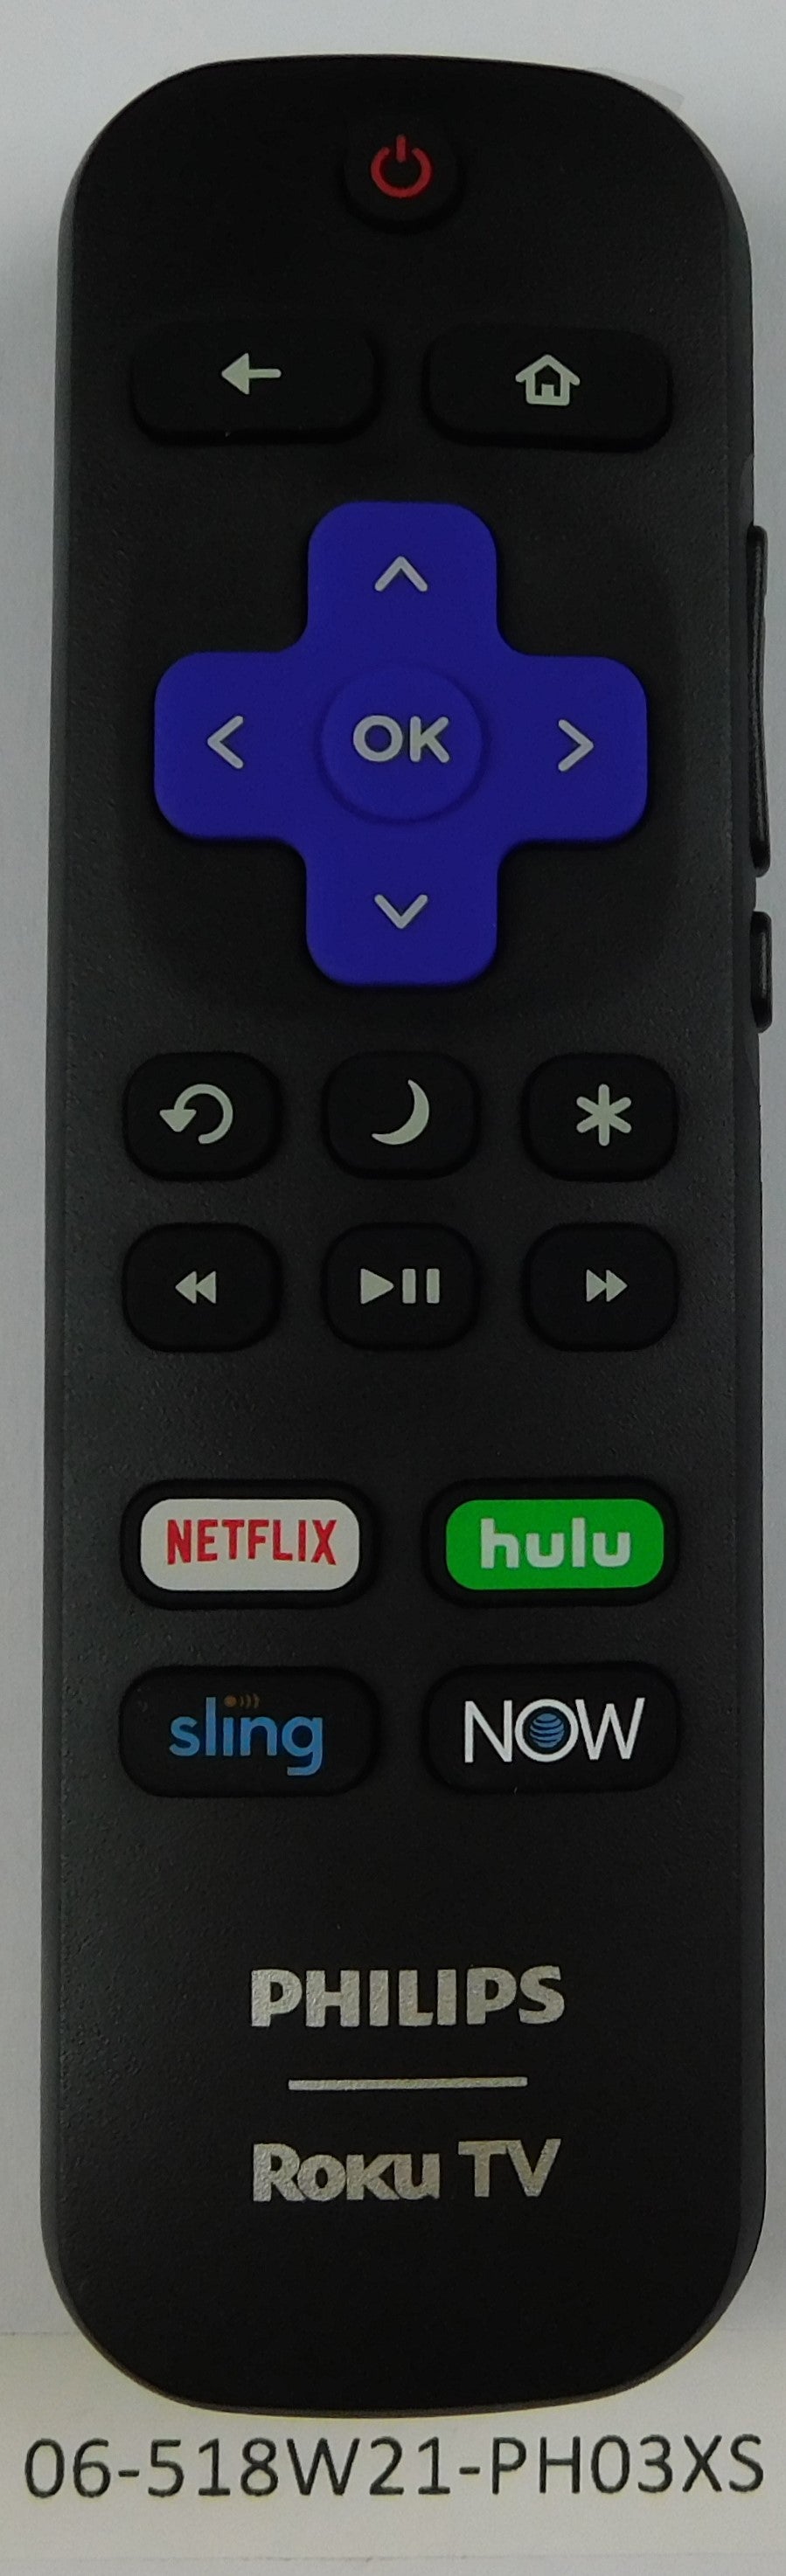 OEM replacement remote control for Philips Roku TV 06-518W21-PH03XS